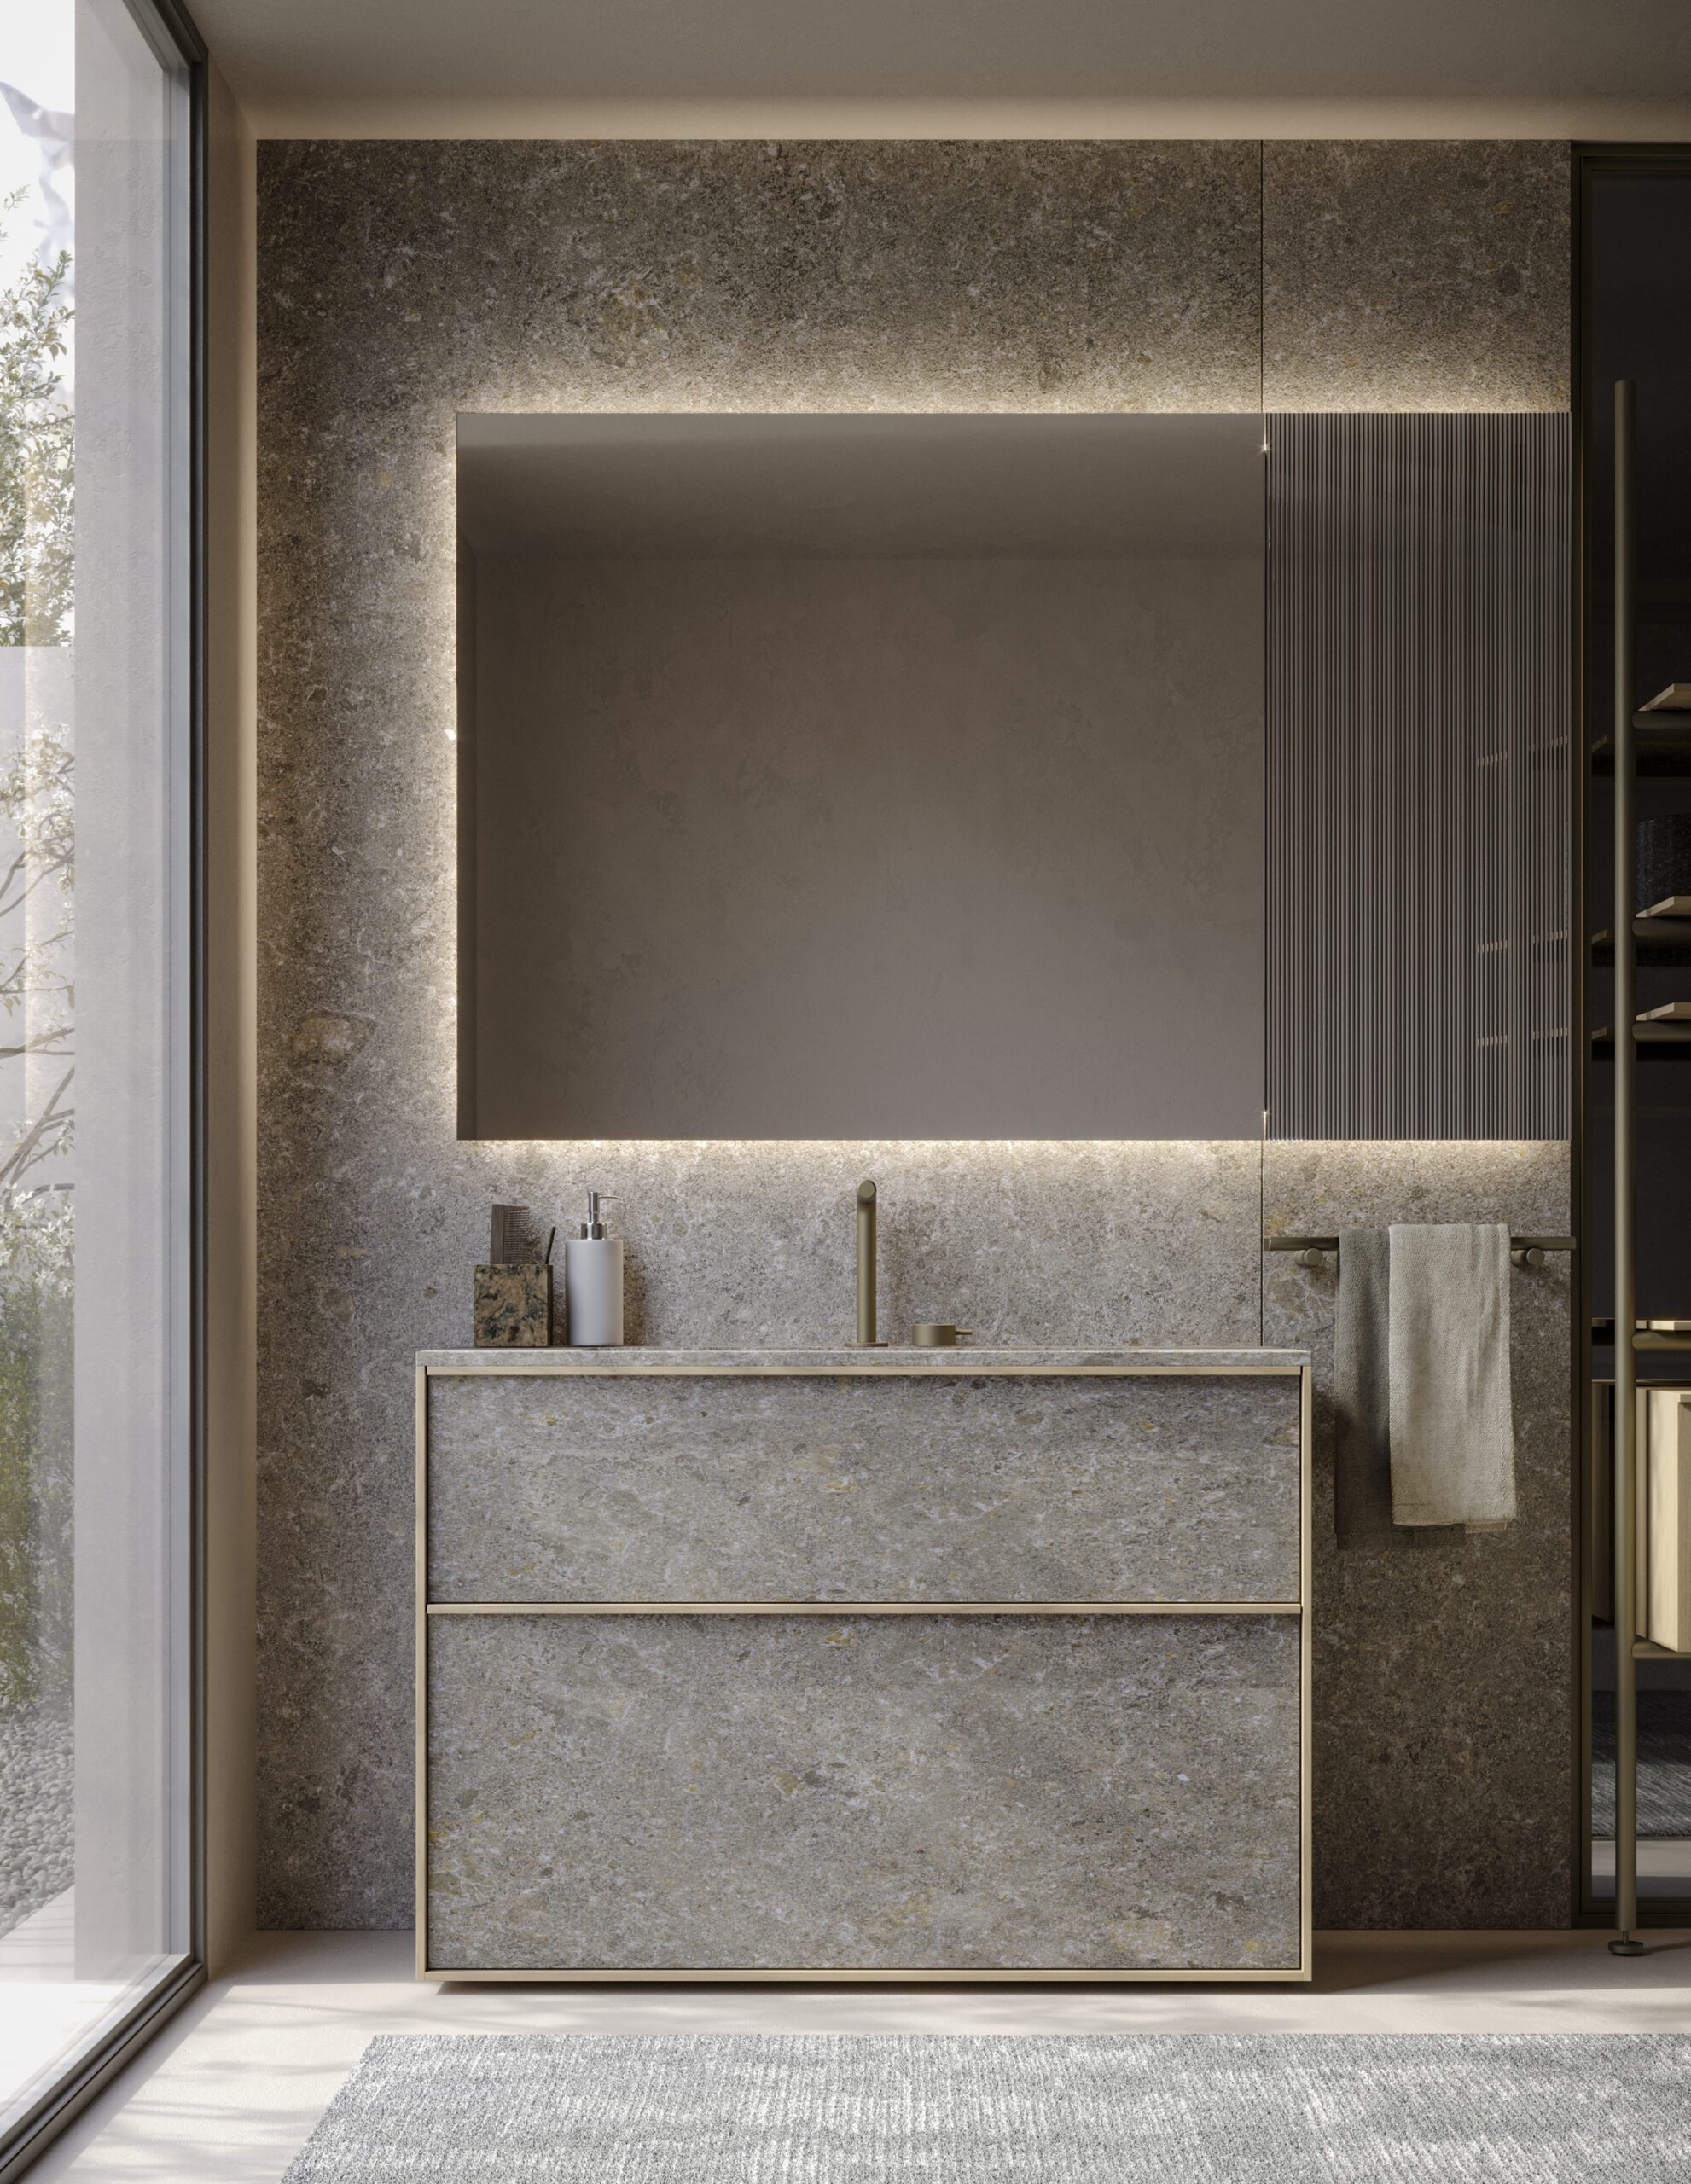 The Sartus bathroom cabinetry line includes floating vanities, floor-standing cabinets, cabinets with legs, wall and freestanding storage systems.